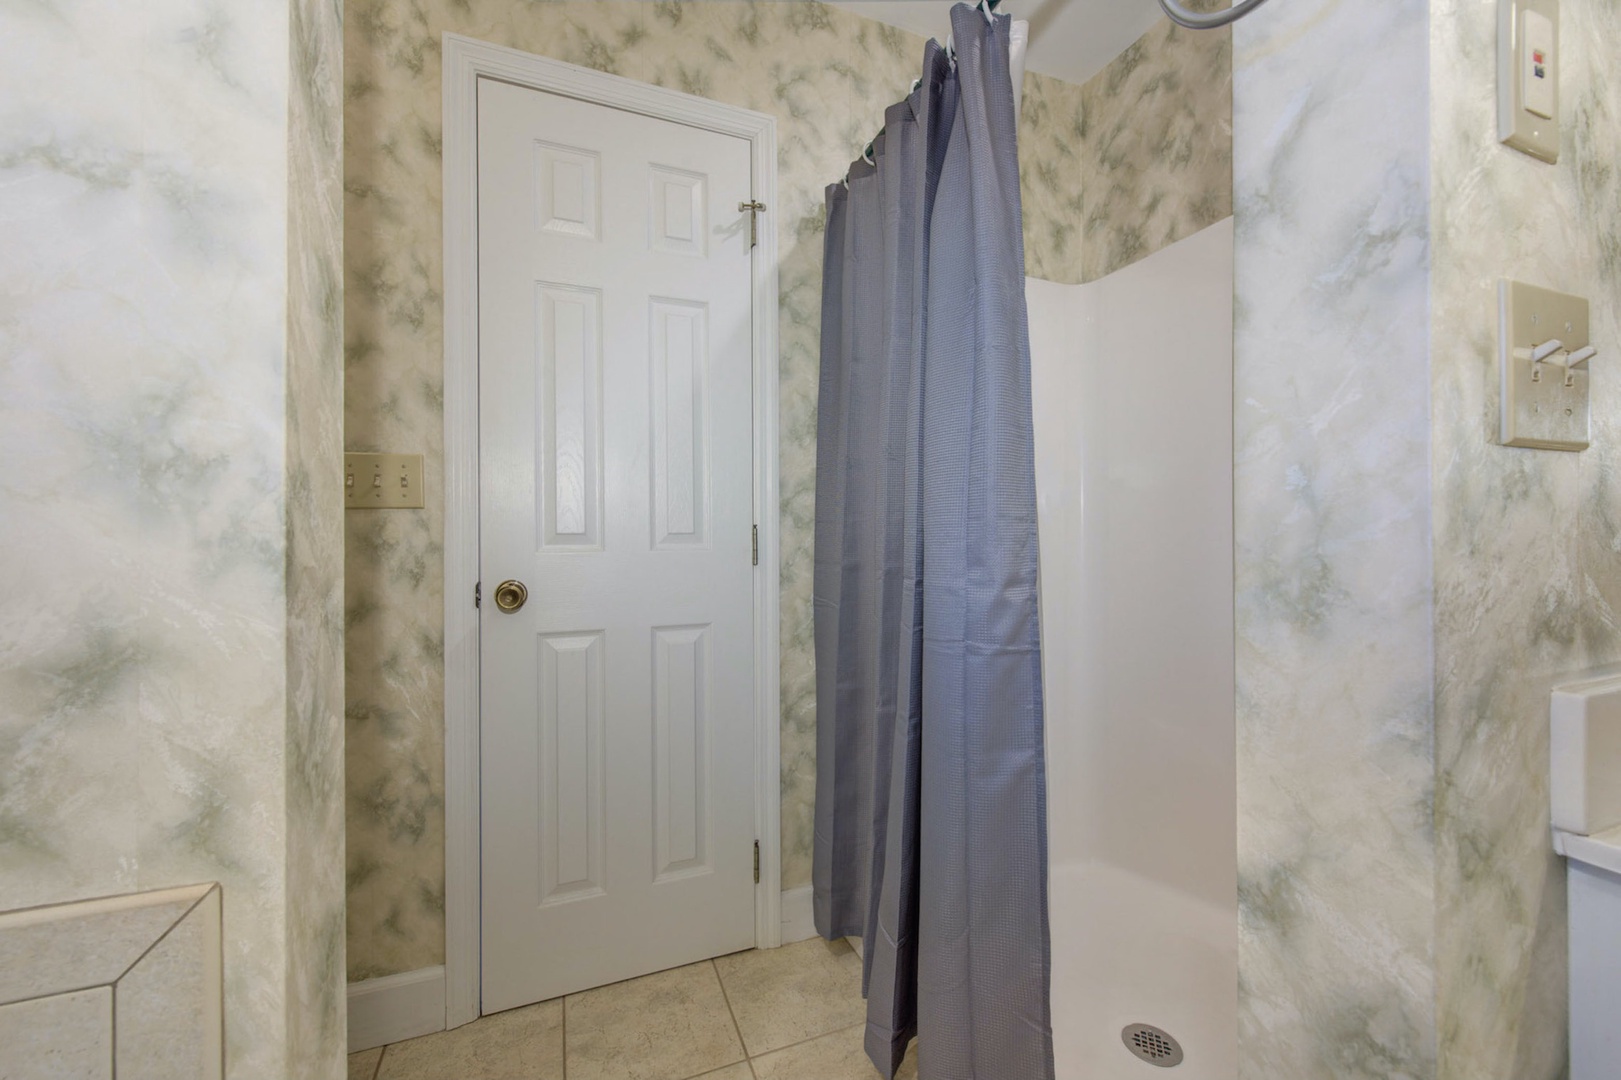 The king ensuite boasts a large vanity, walk-in shower, & jetted tub